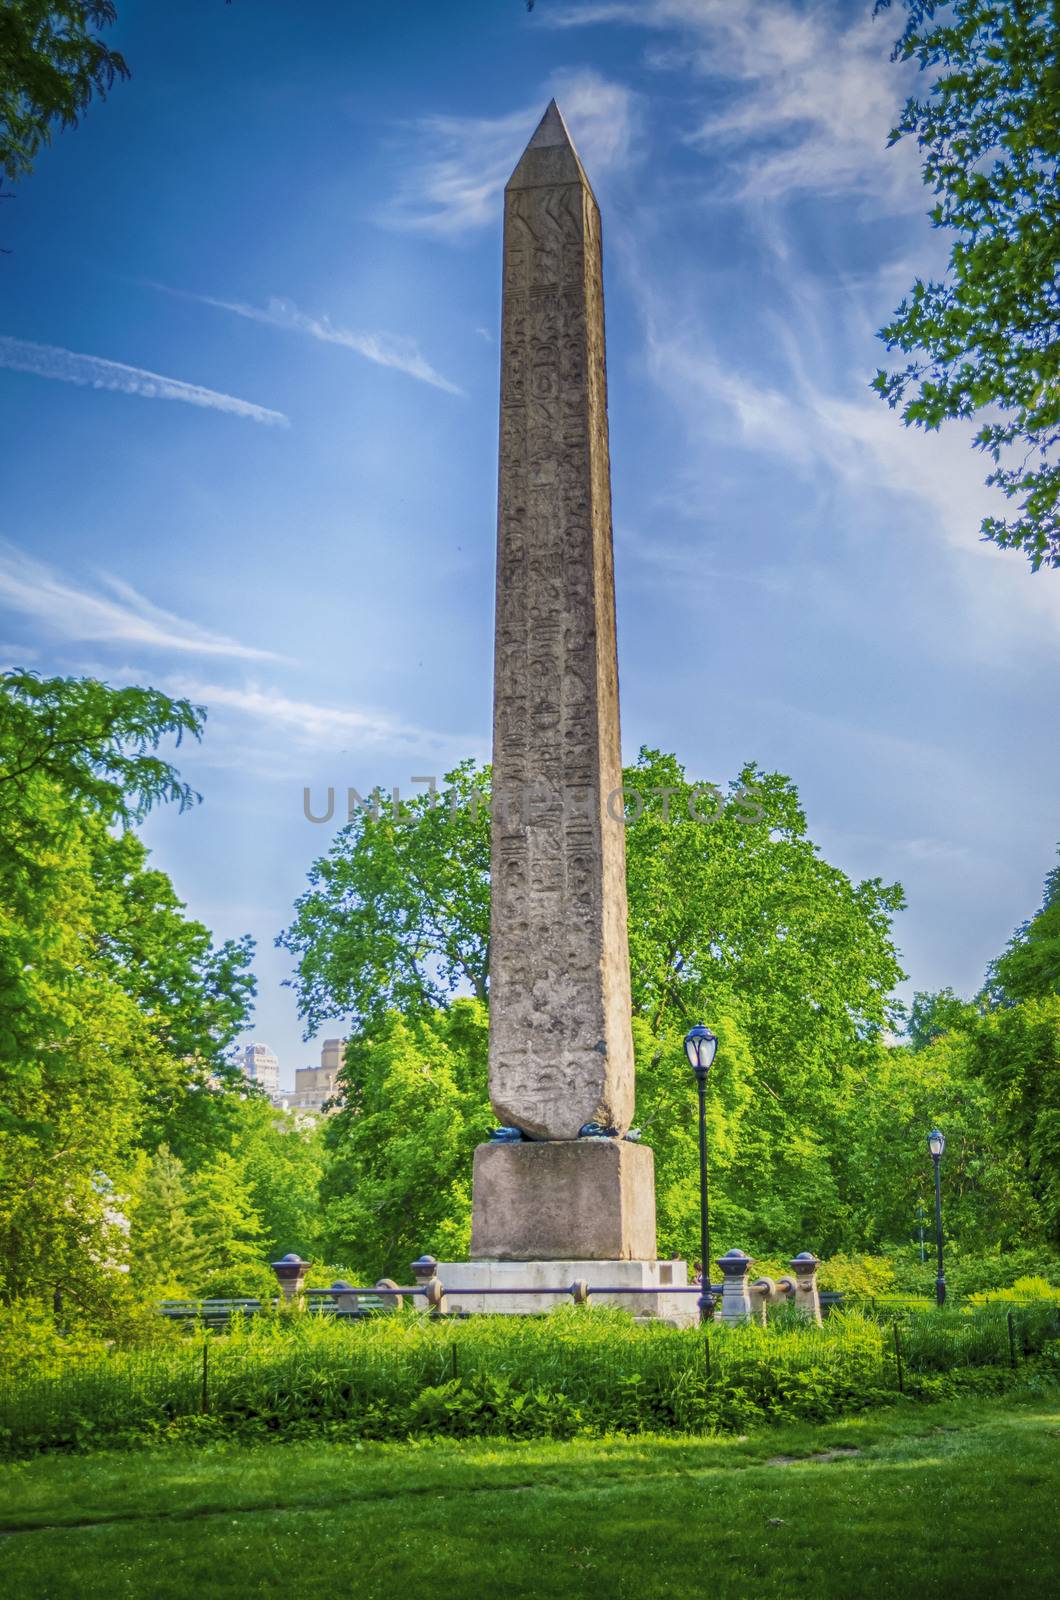 Famous Obelisk called Cleopatra's Needle in Central Park, New York